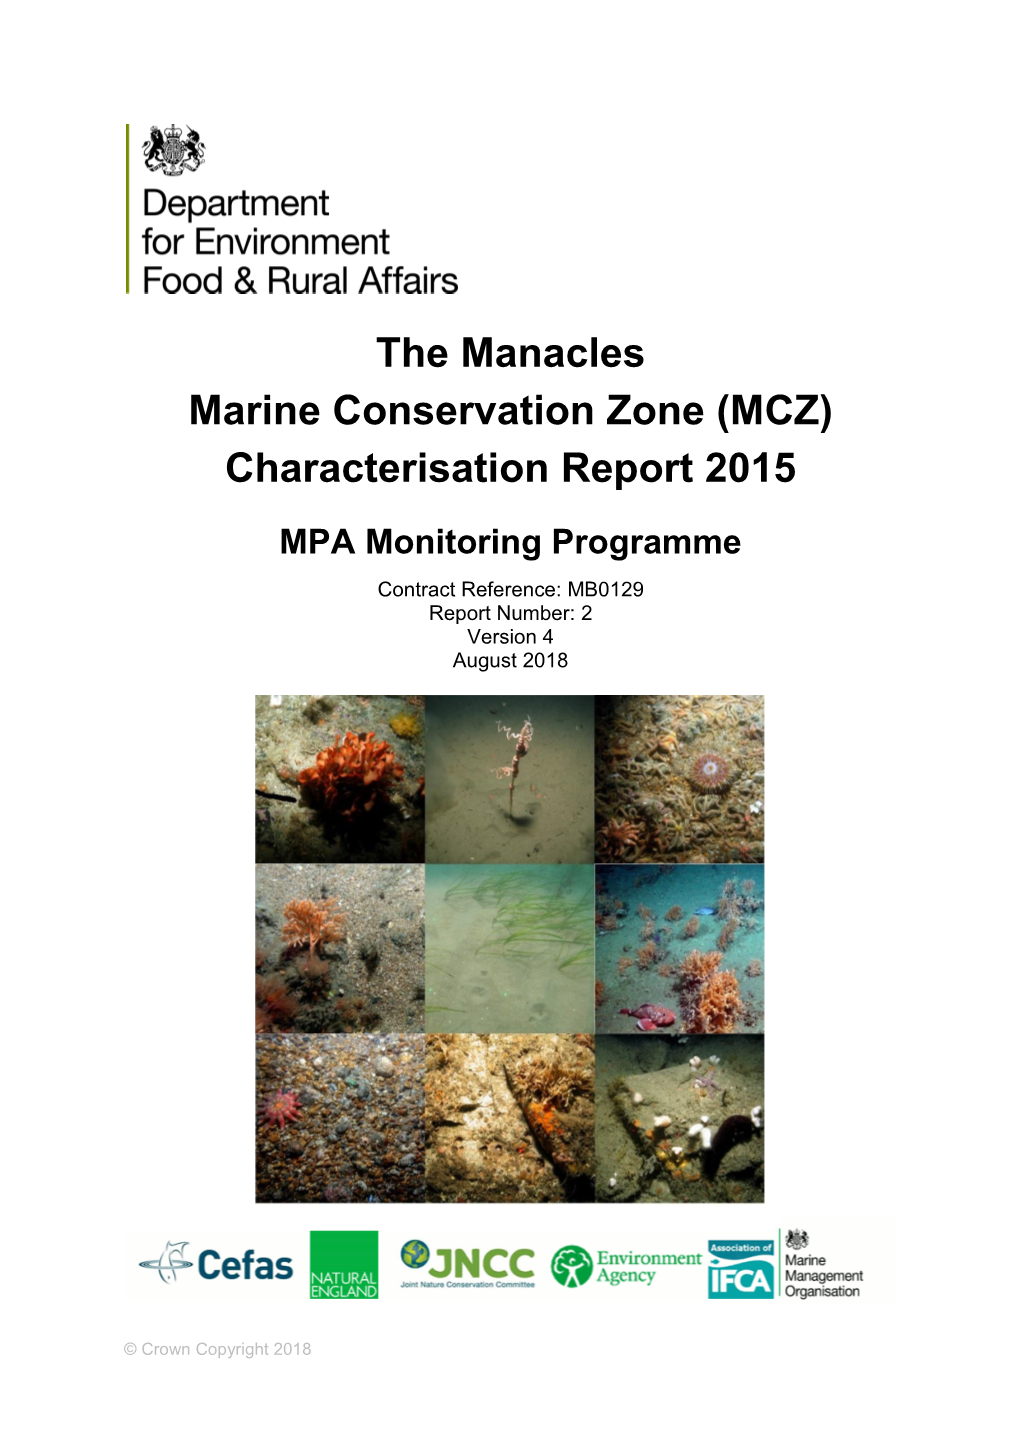 The Manacles Marine Conservation Zone (MCZ) Characterisation Report 2015